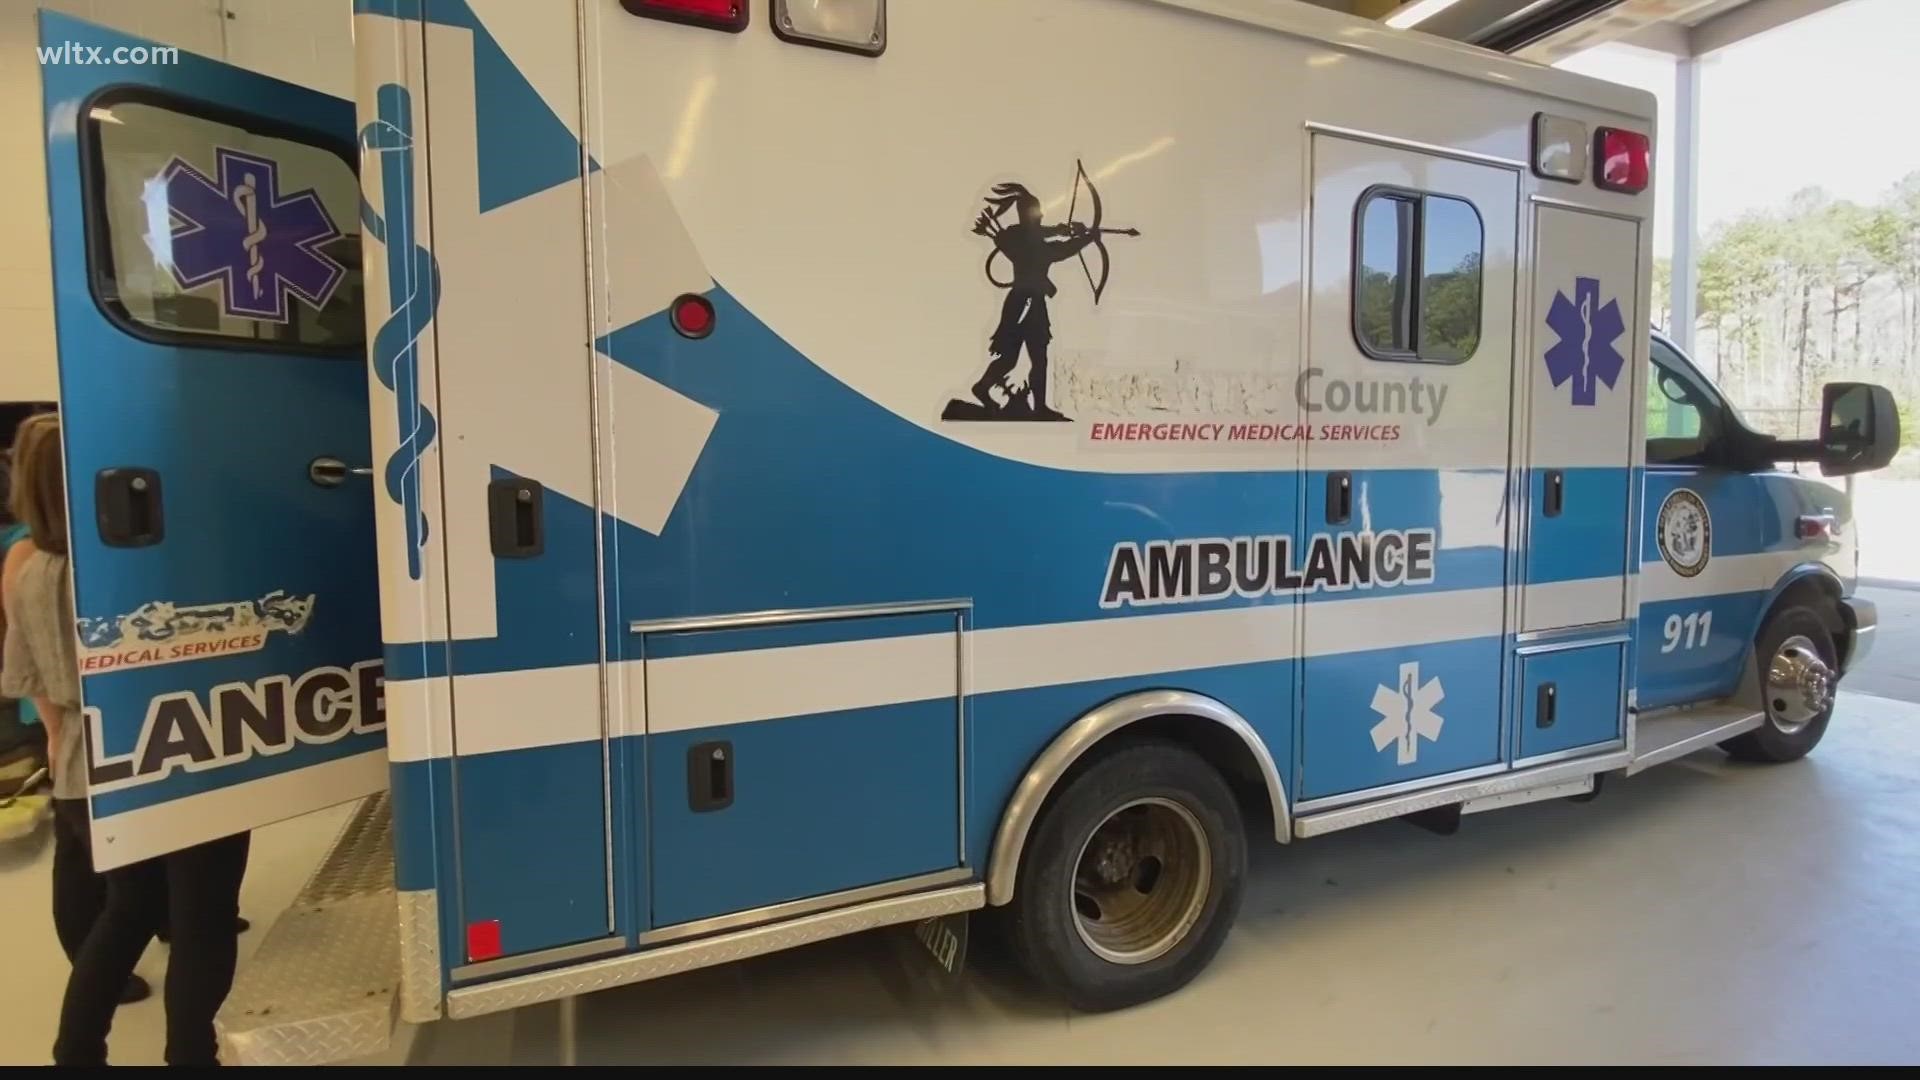 Students at Woolard Technology Center are going to get real hands on experience with the donated ambulance.